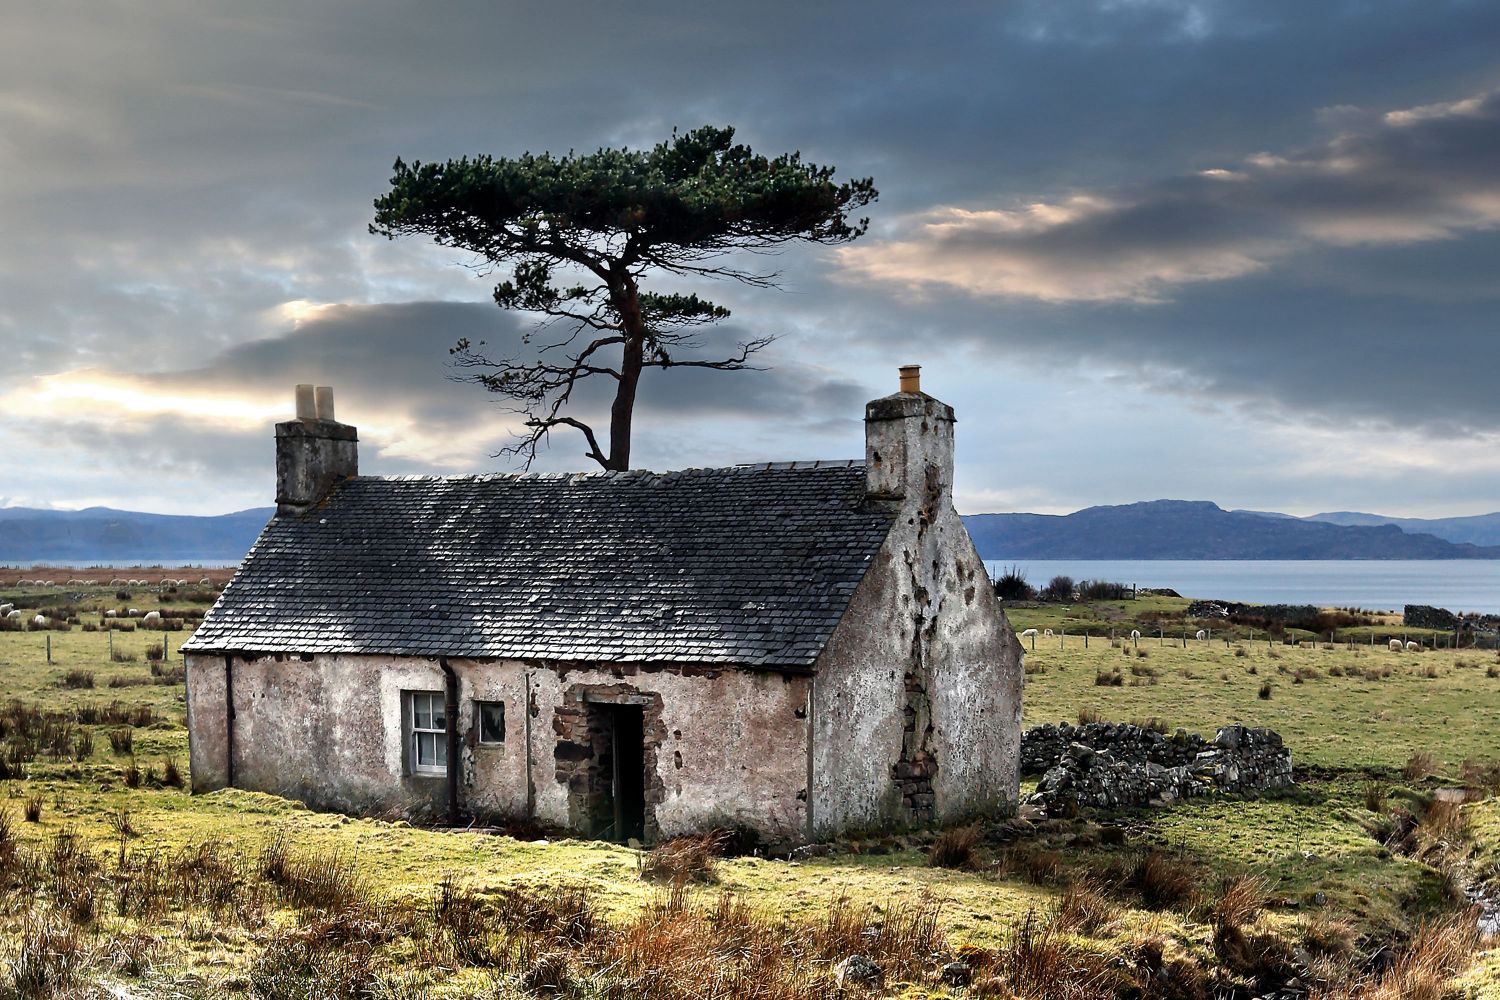 Abandoned Croft at Kalnakill on the way to Applecross by Martin Lawrence